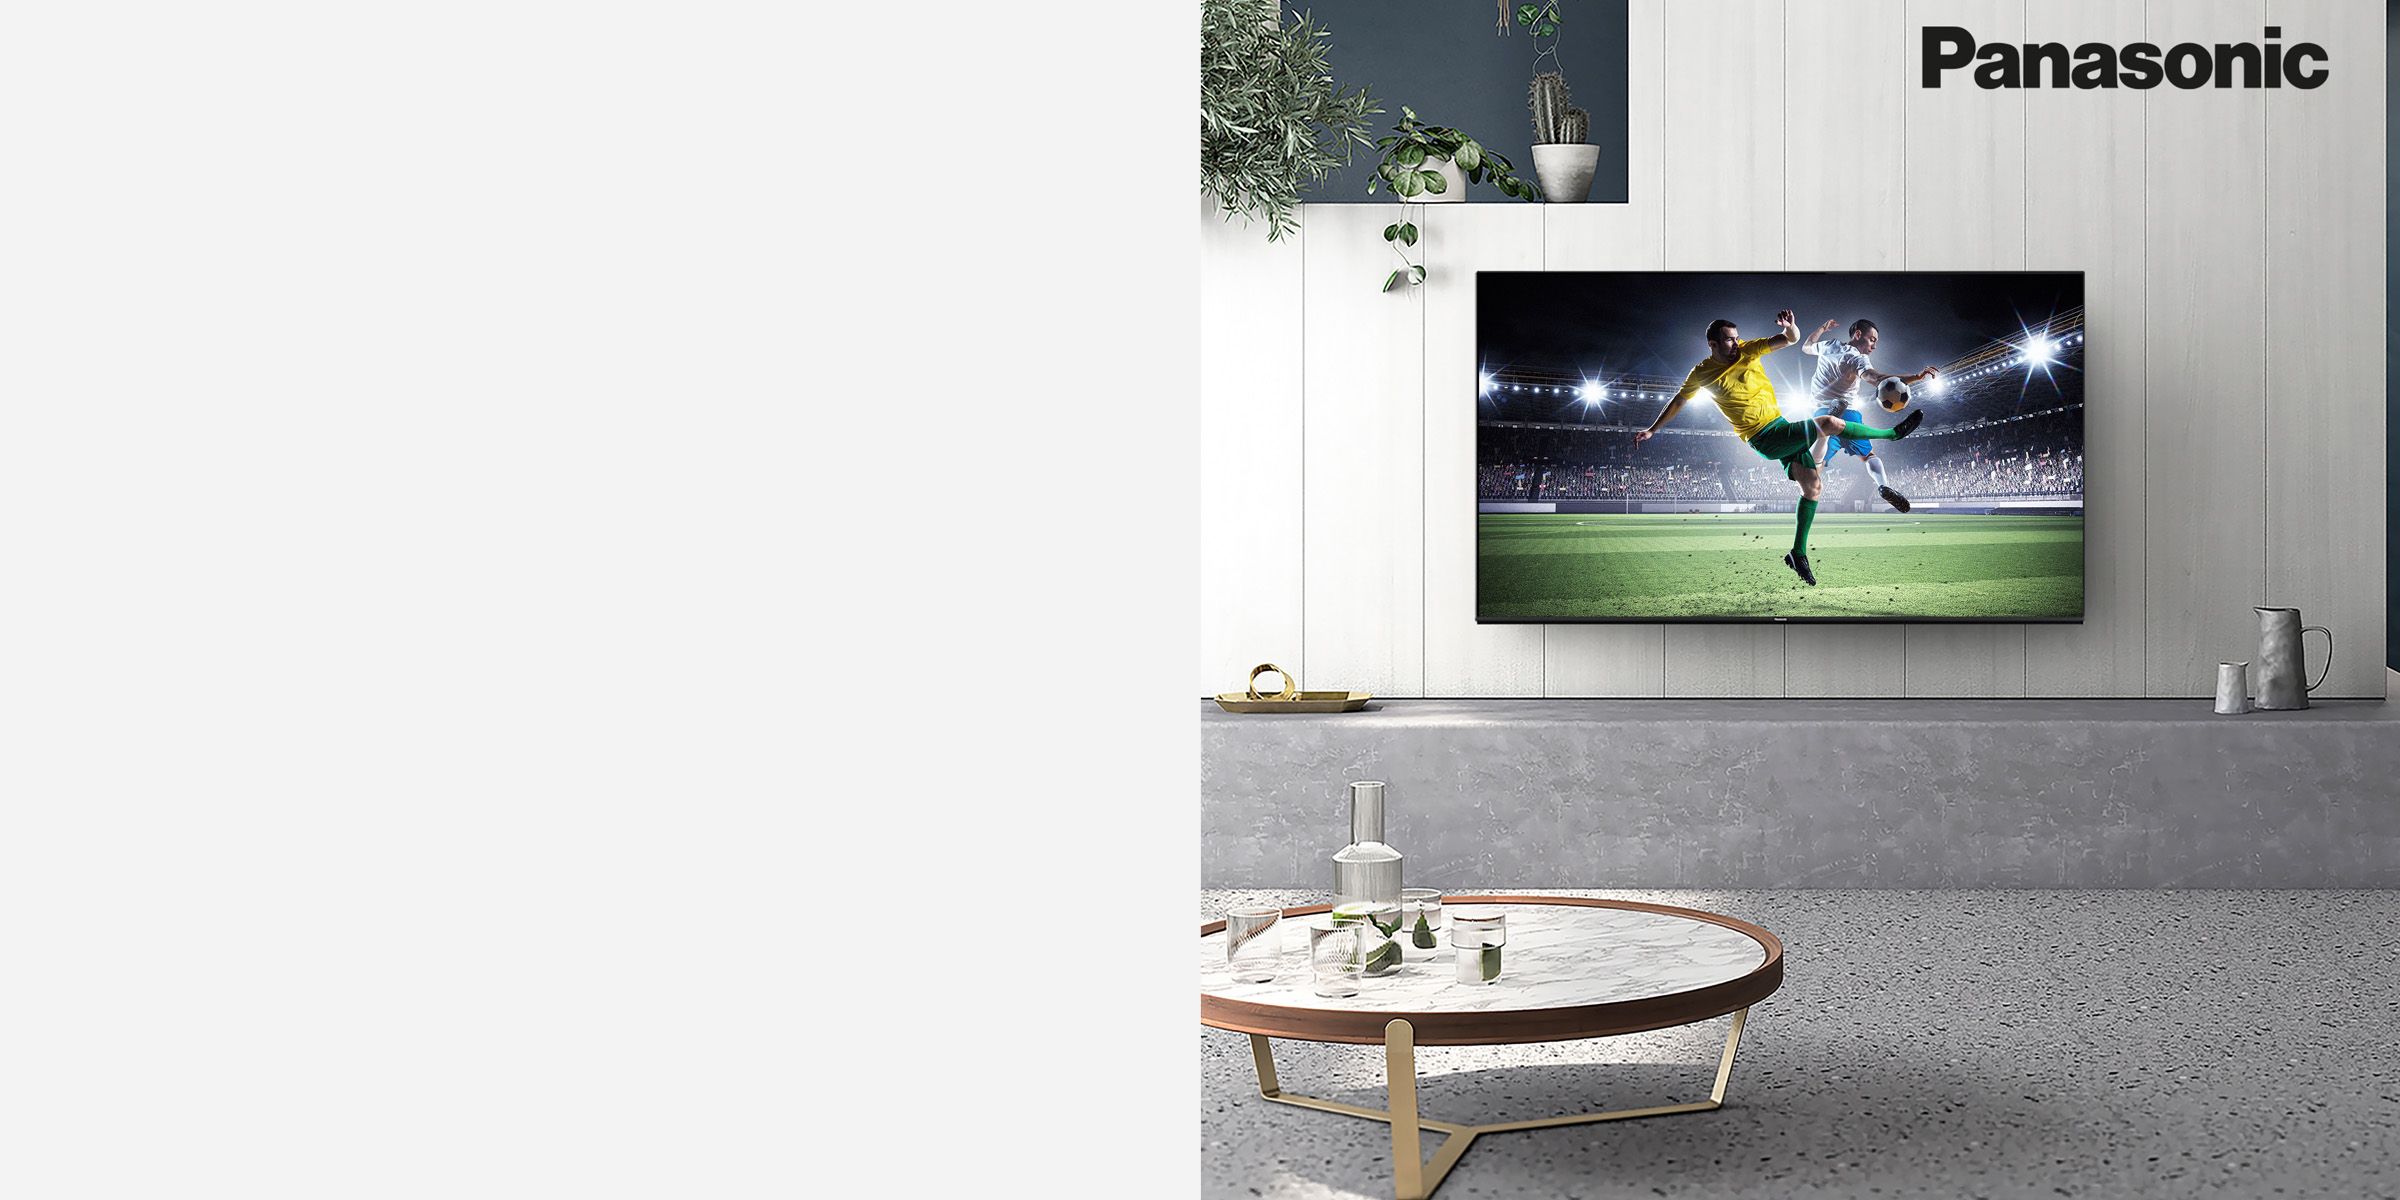 Panasonic TV on a wall showing the football